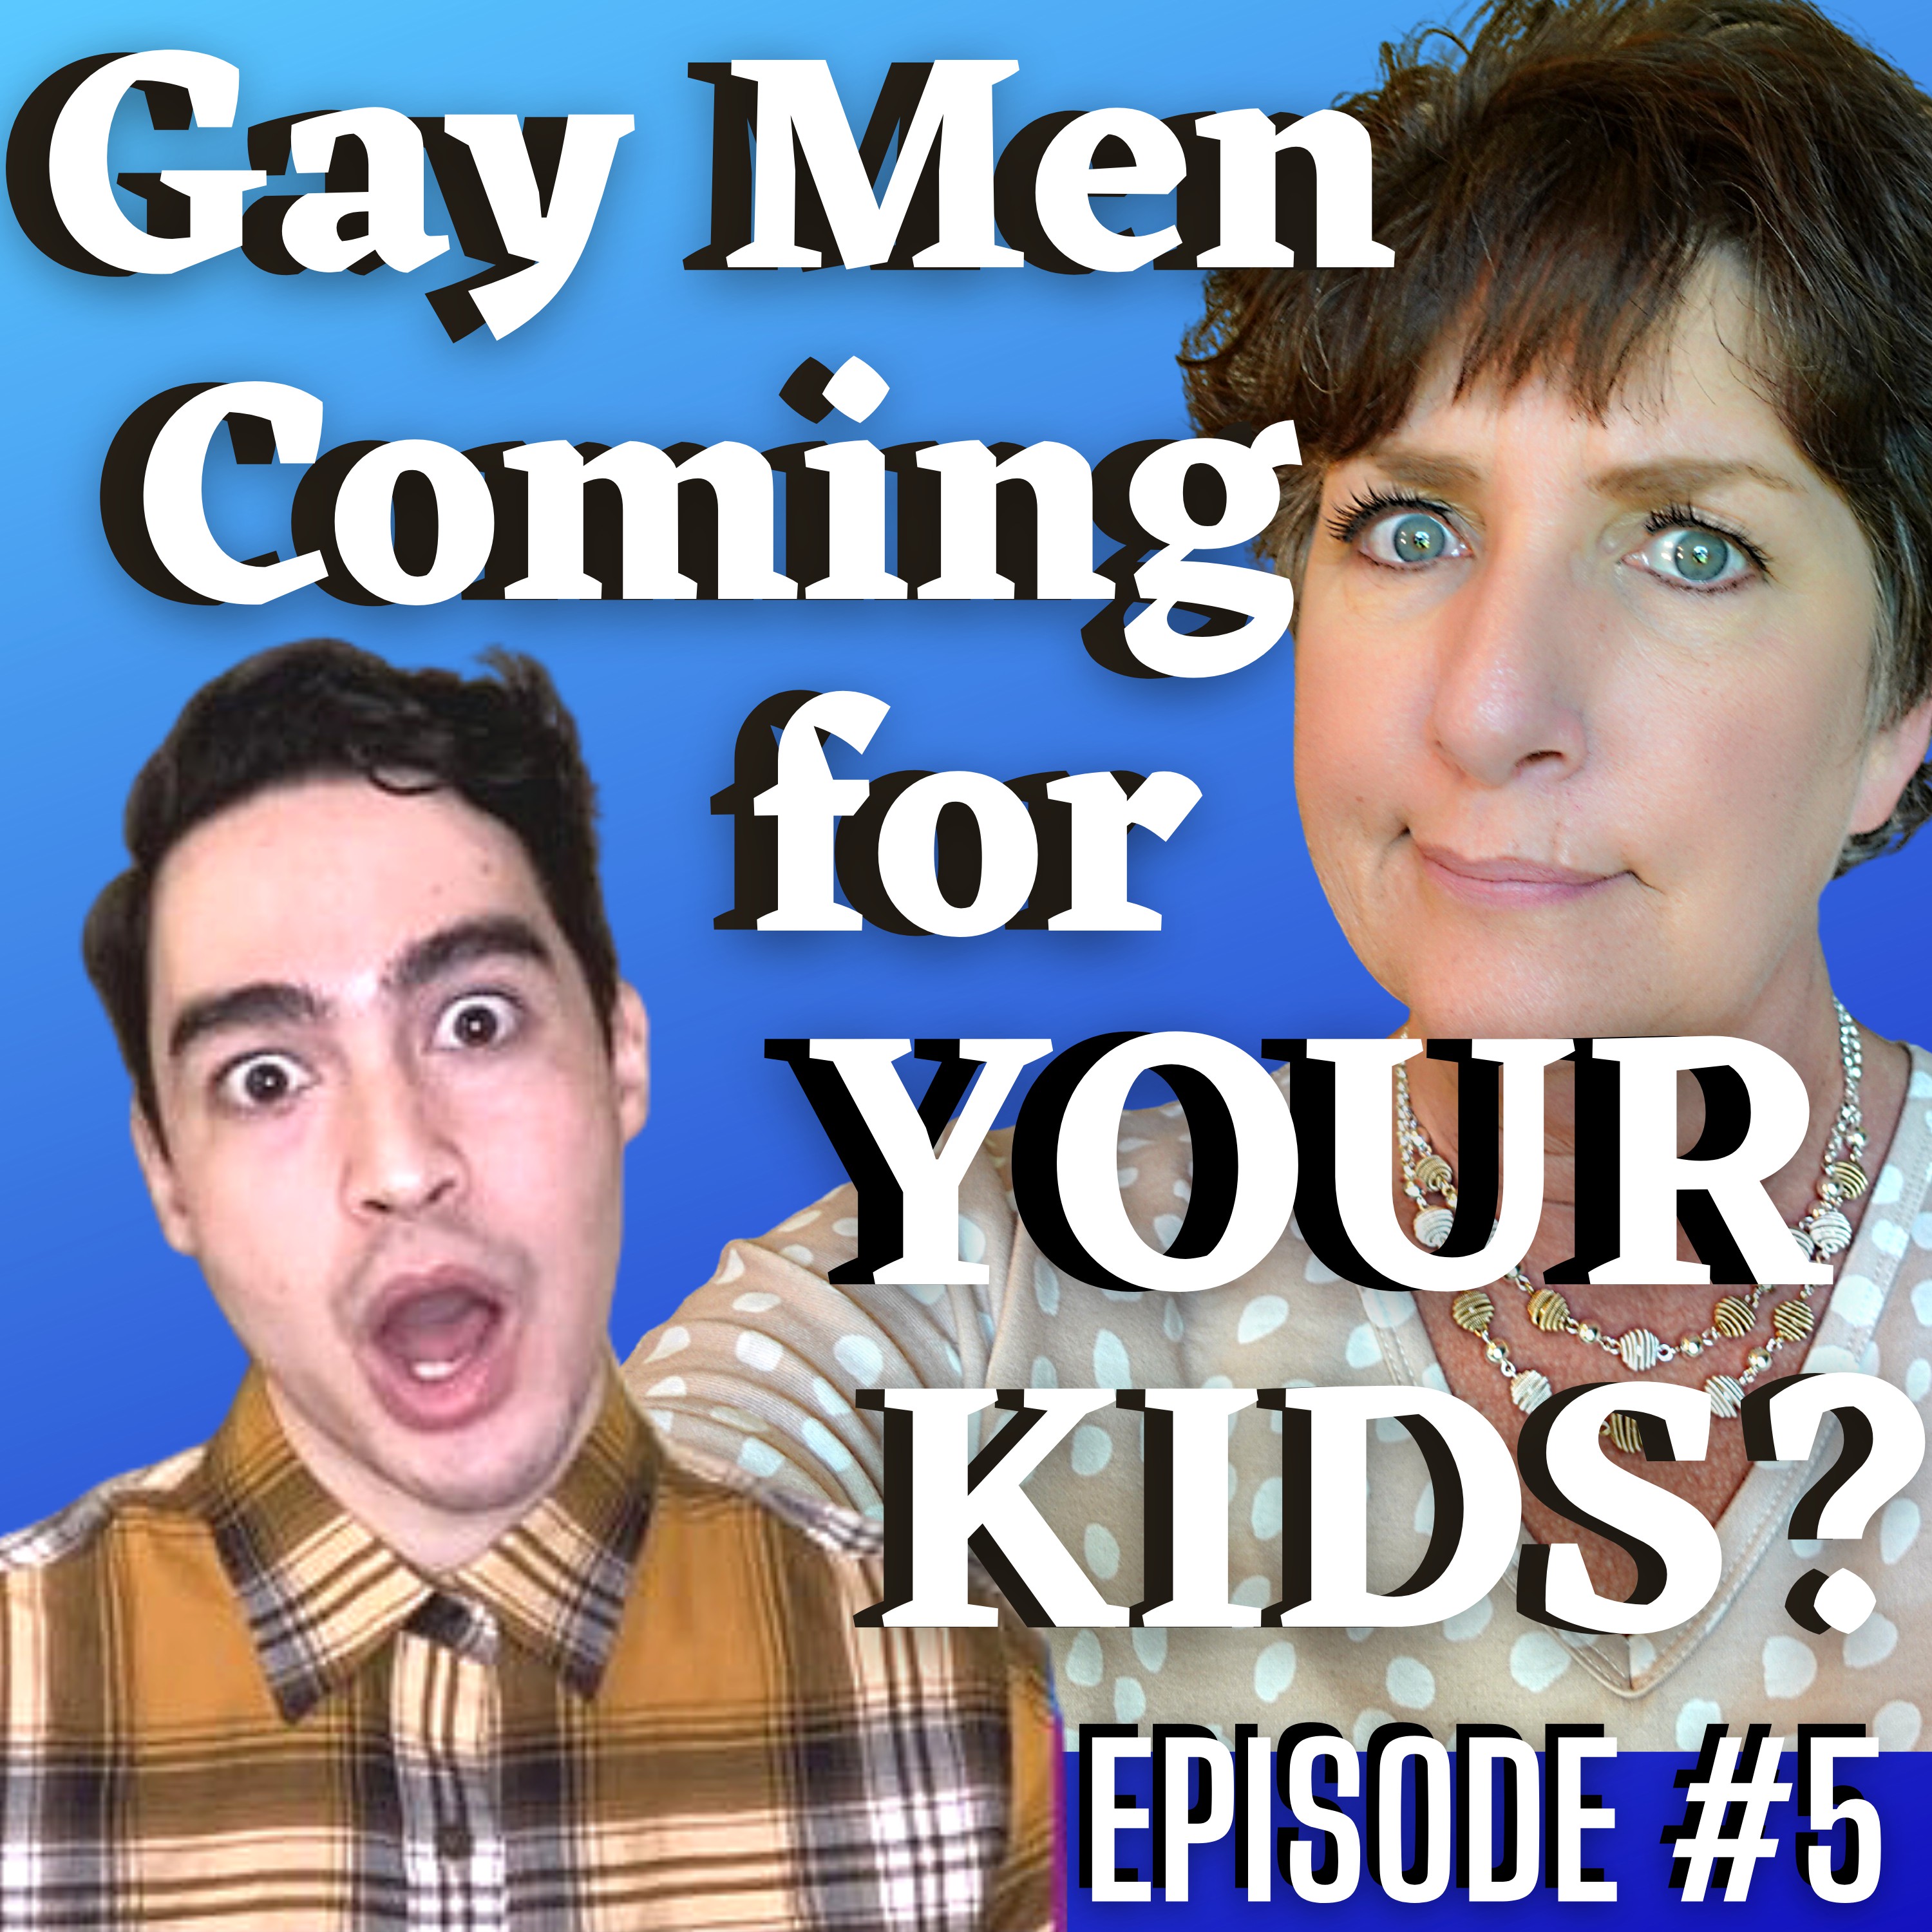 Parenting News & the Culture War - Mommy Answer Lady